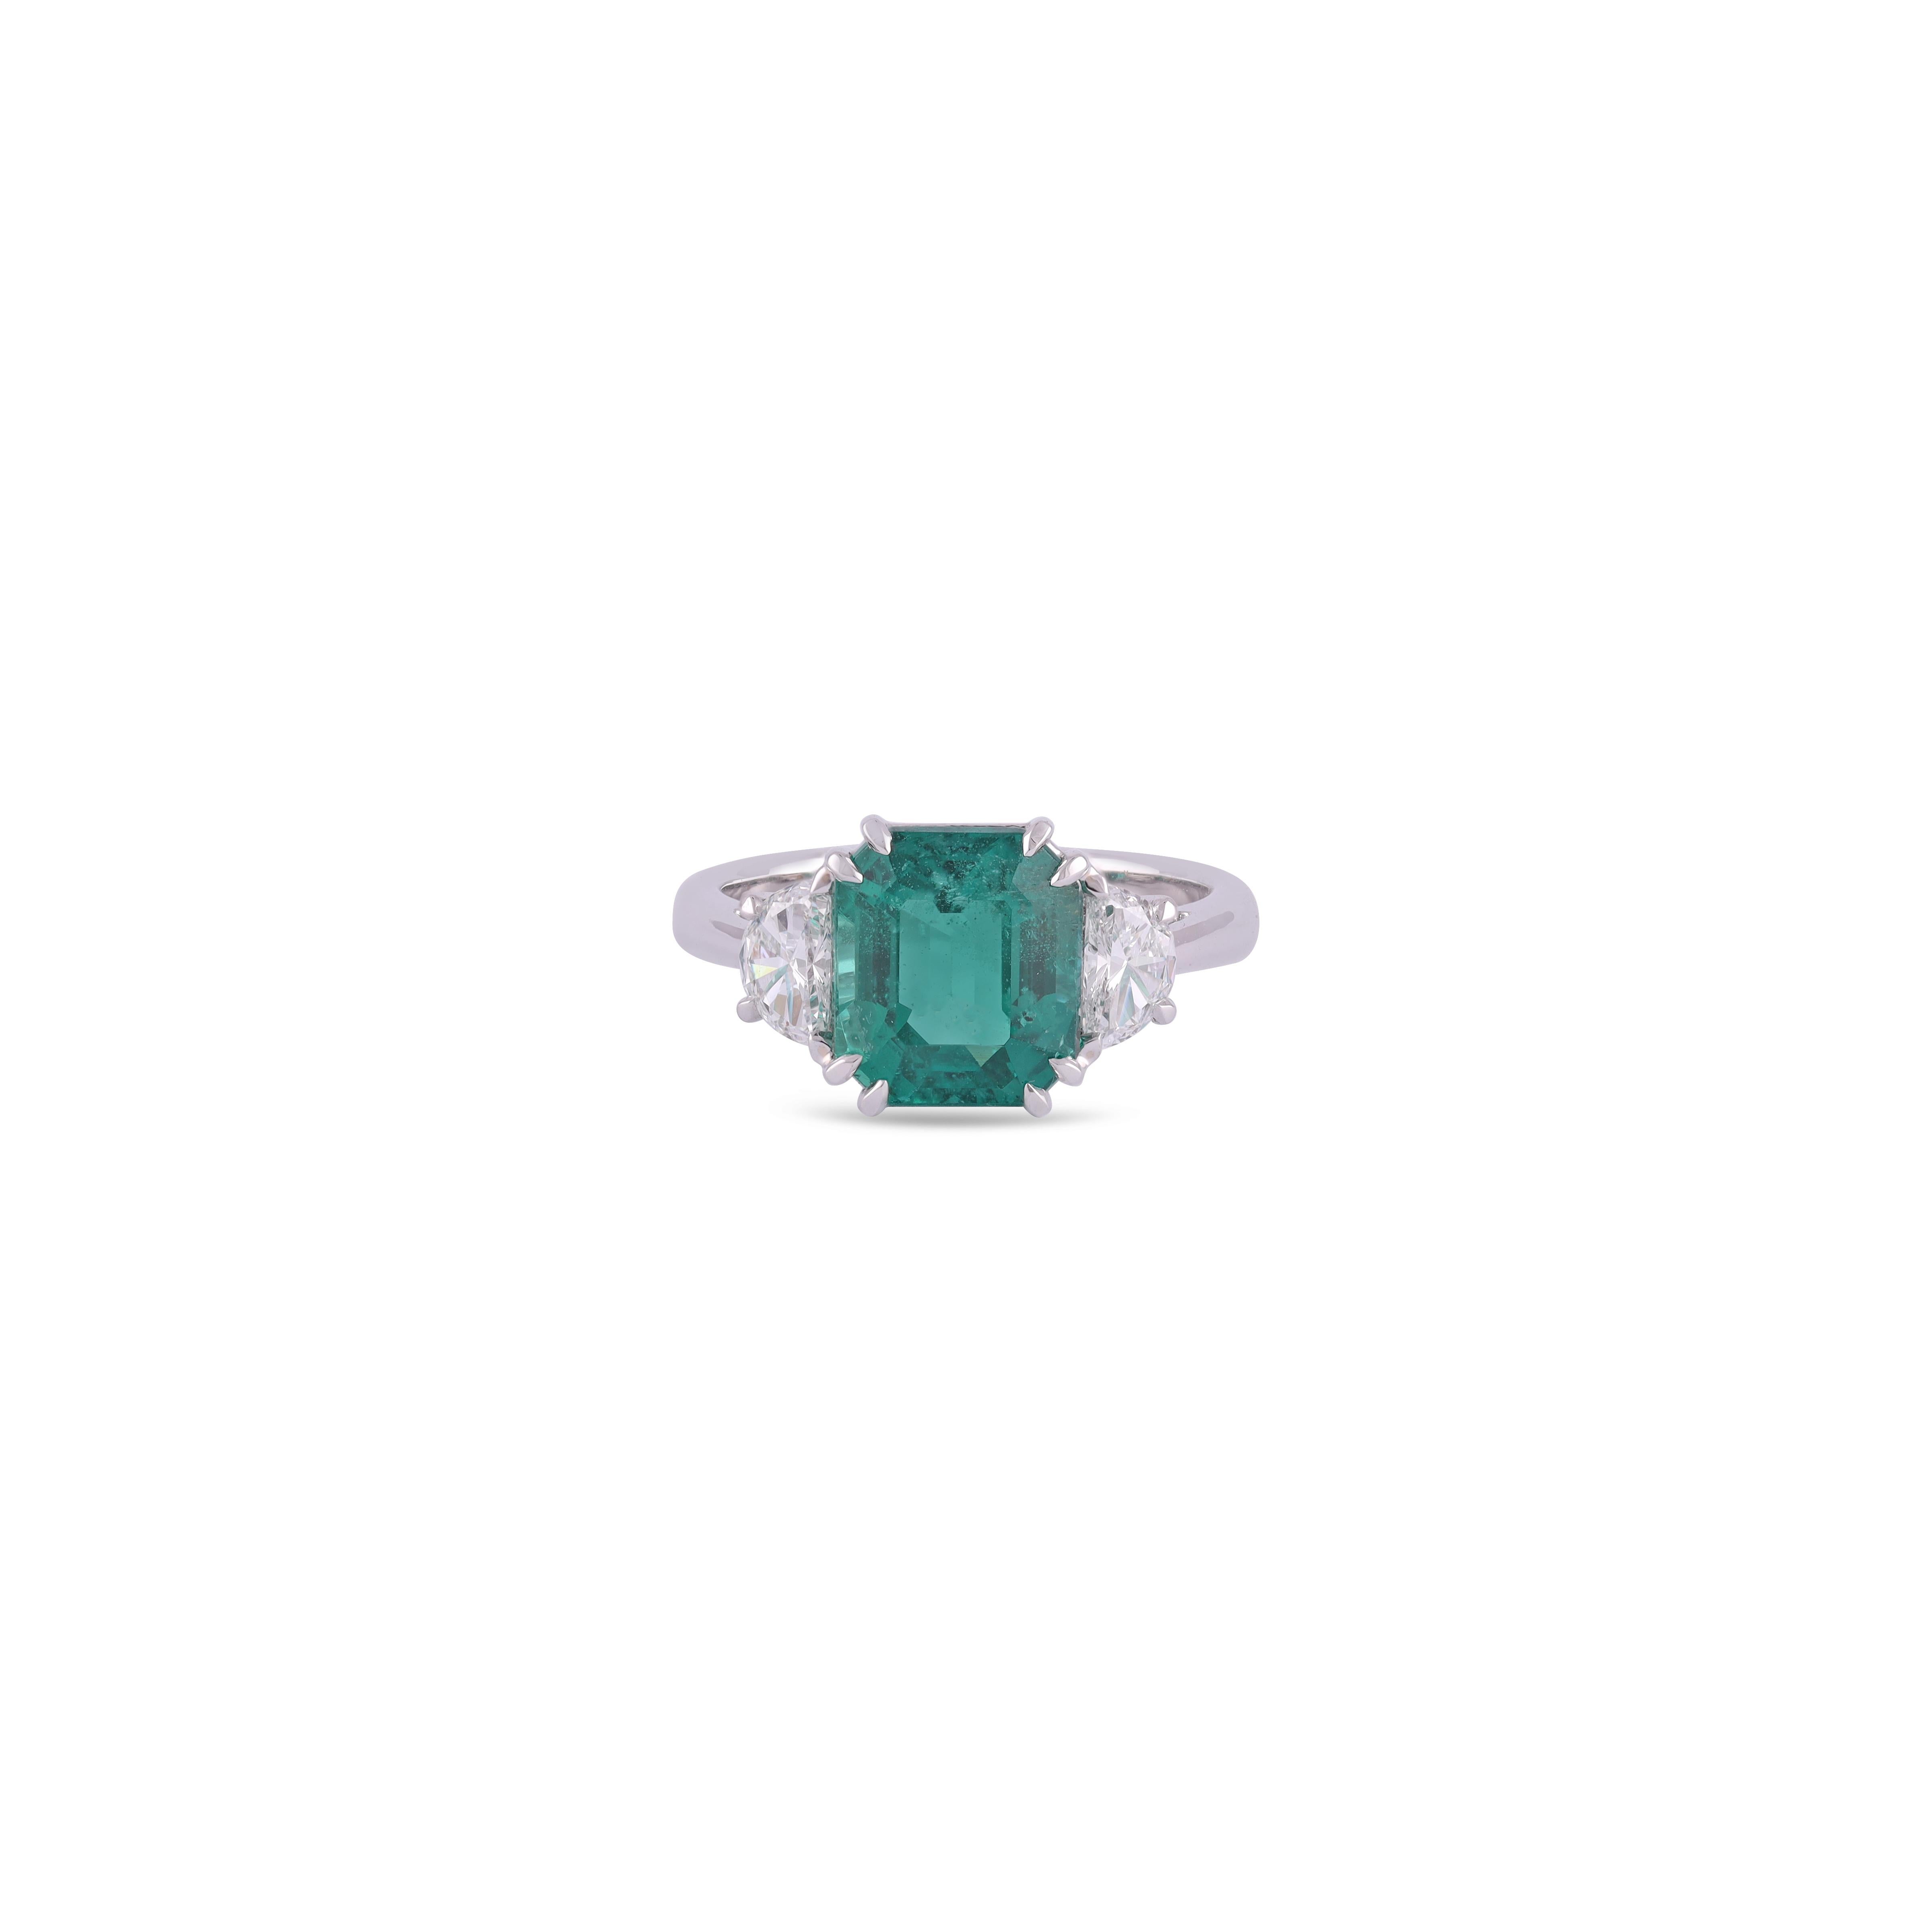 Contemporary 3.78 Carat Clear High Zambian Emerald & Diamond Ring in 18 Karat Gold For Sale